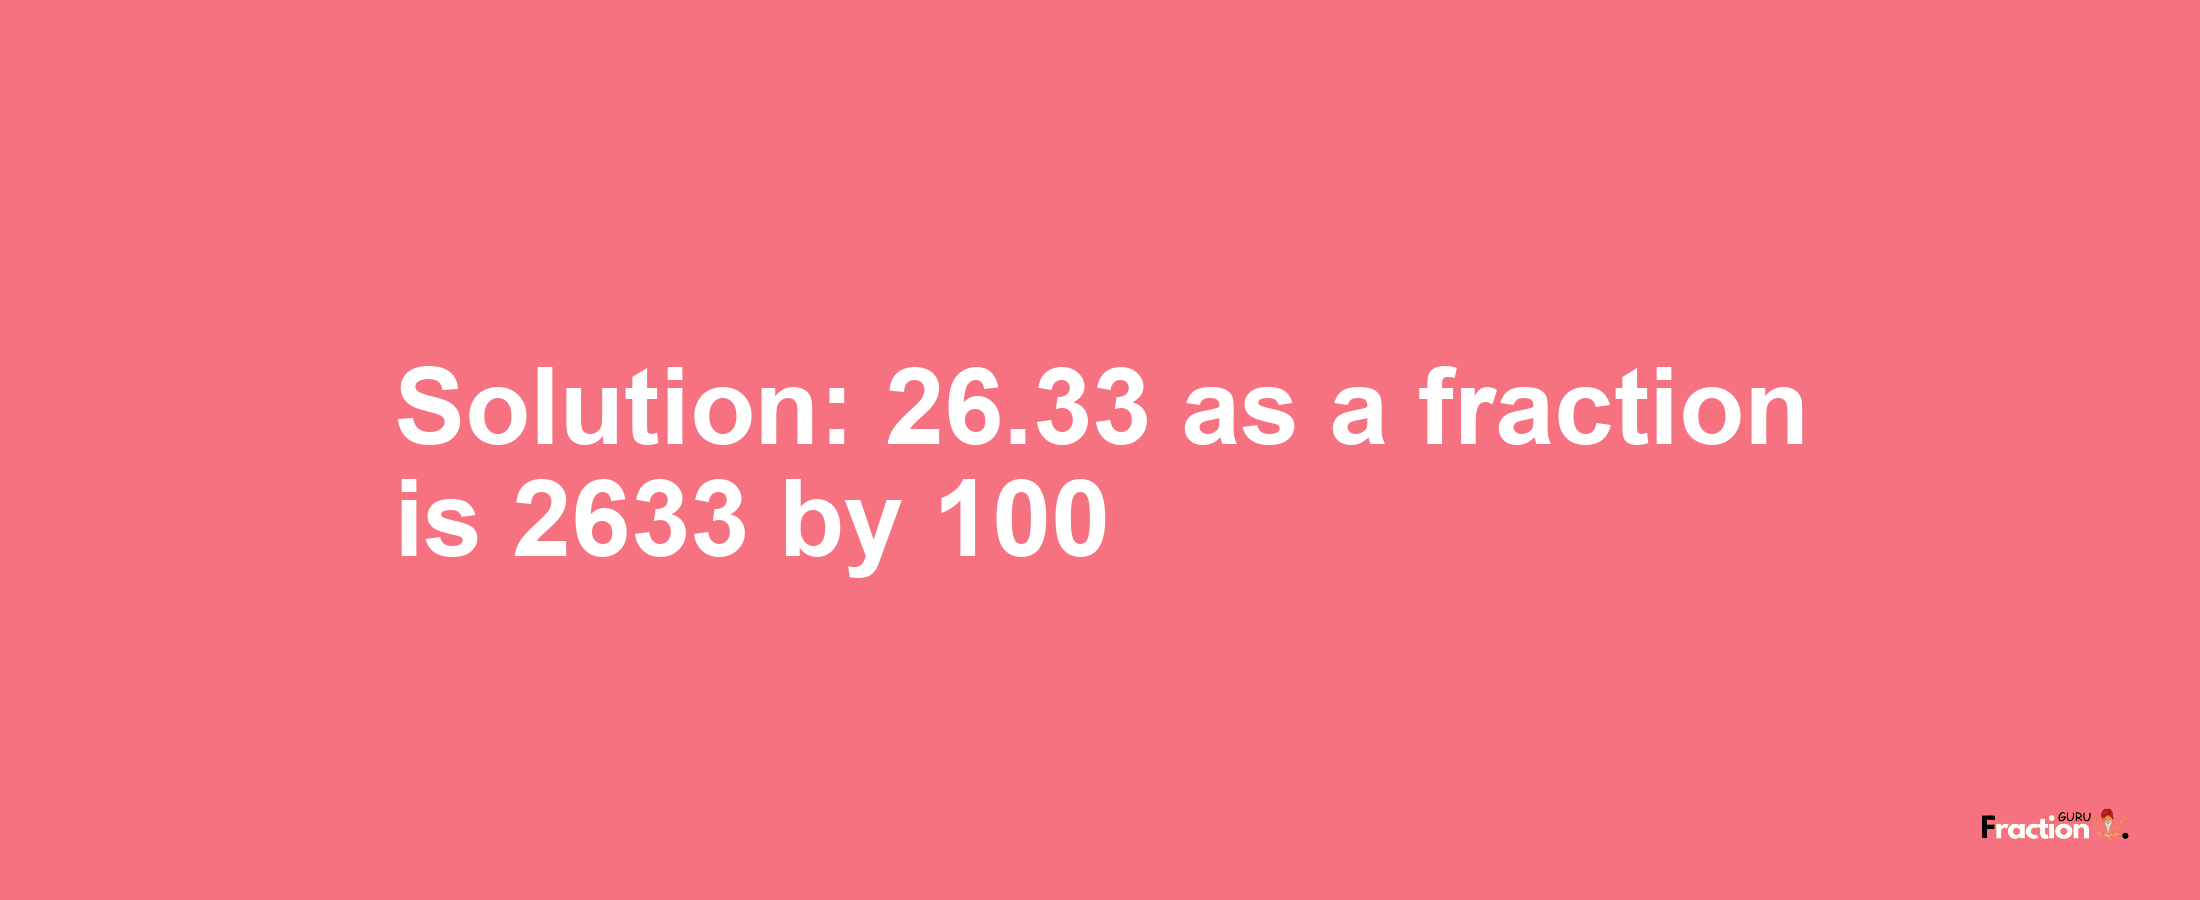 Solution:26.33 as a fraction is 2633/100